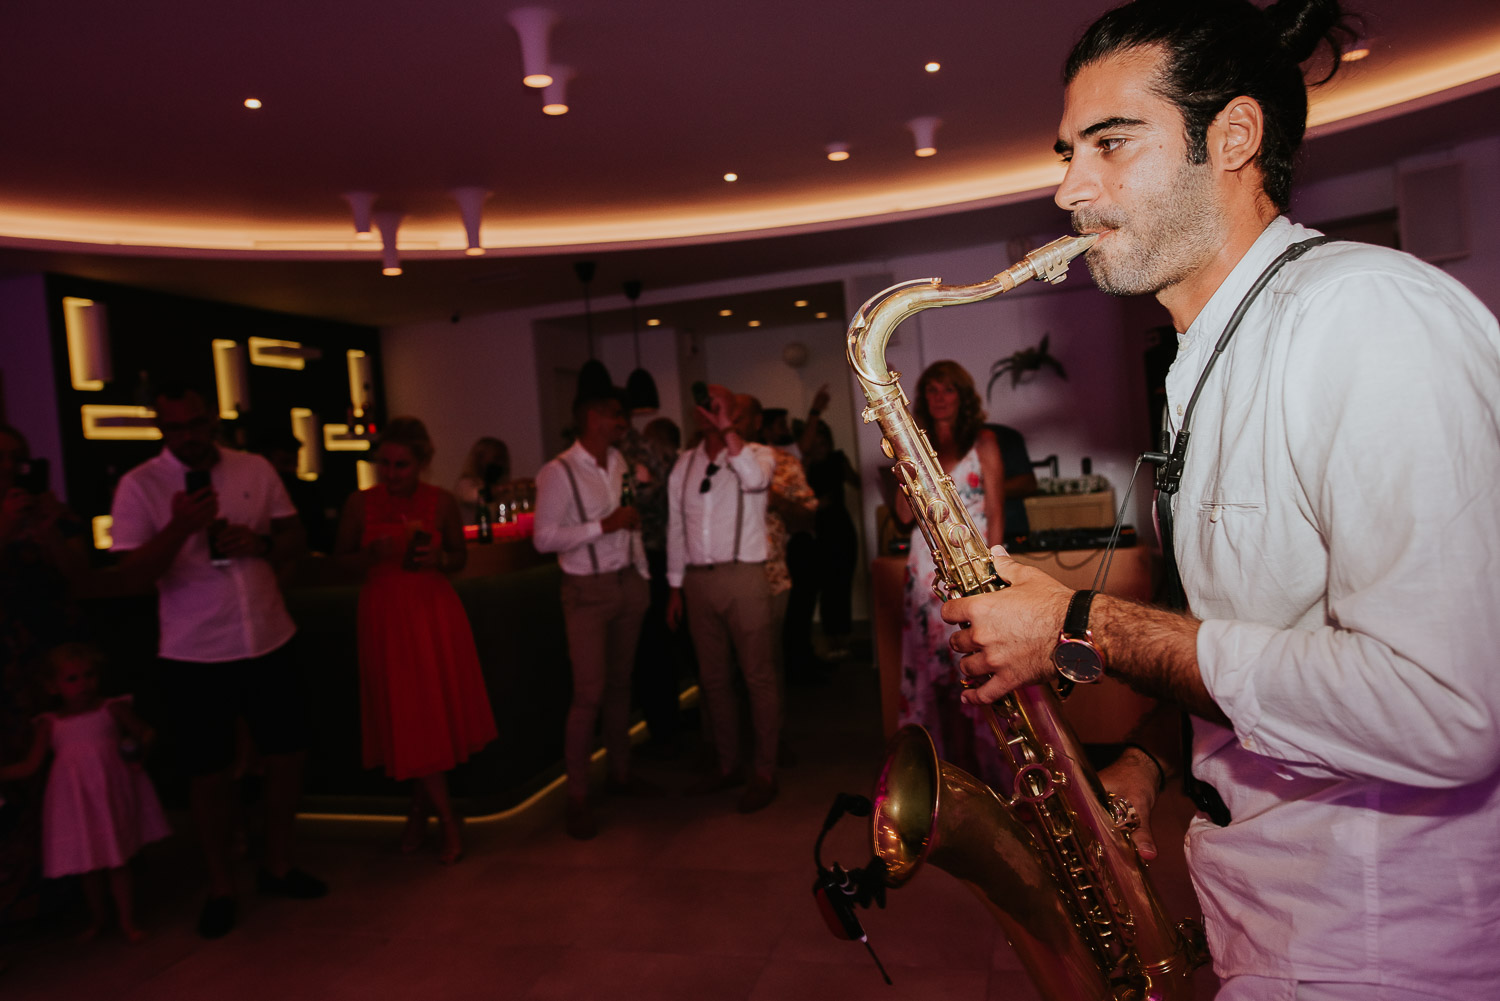 Wedding photographer Santorini: close up of the sax player surrounded by the guests on the dance floor by Ben and Vesna.